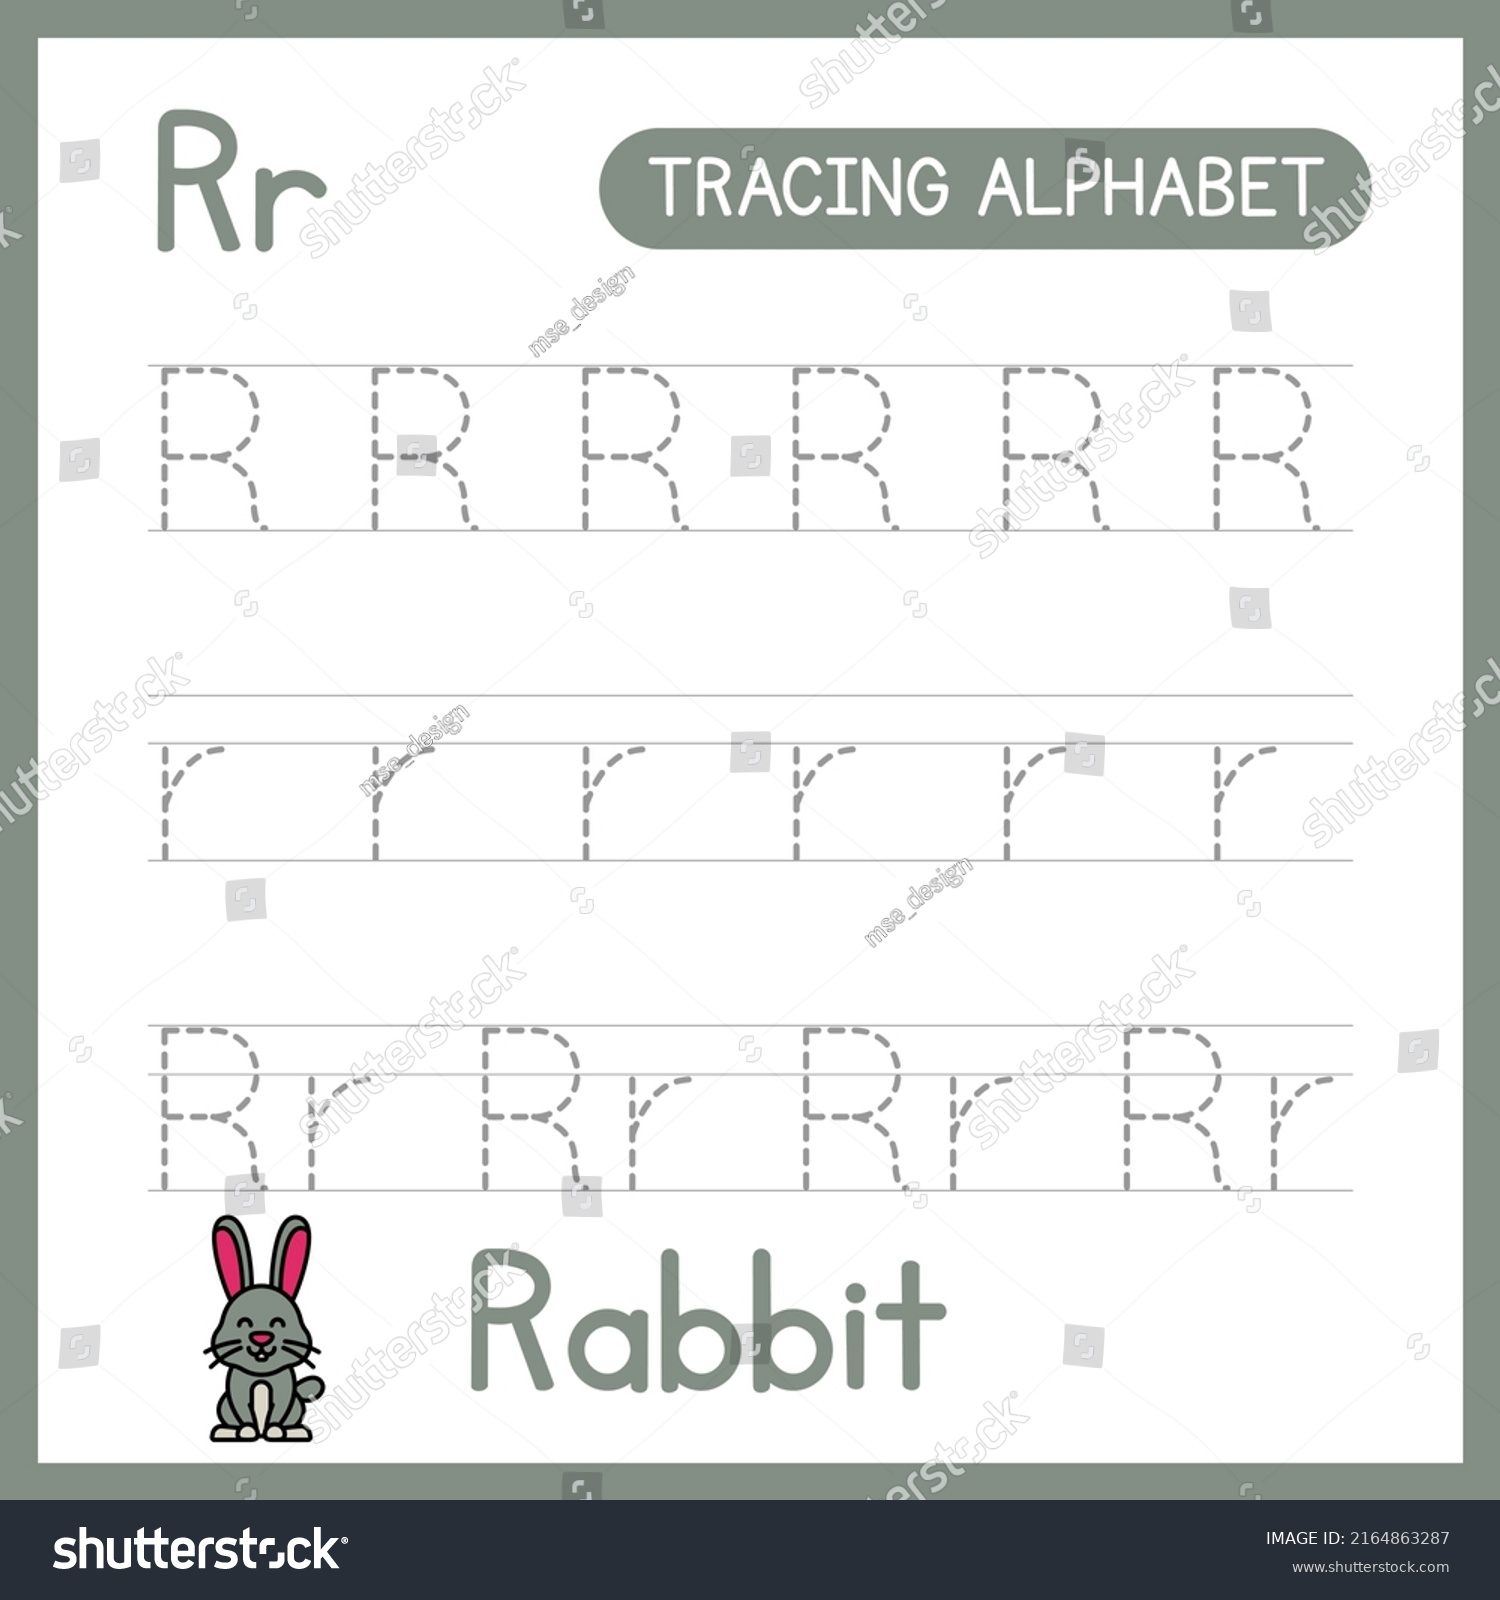 Alphabet Tracing Practice Letter R Learning Stock Vector (Royalty Free ...